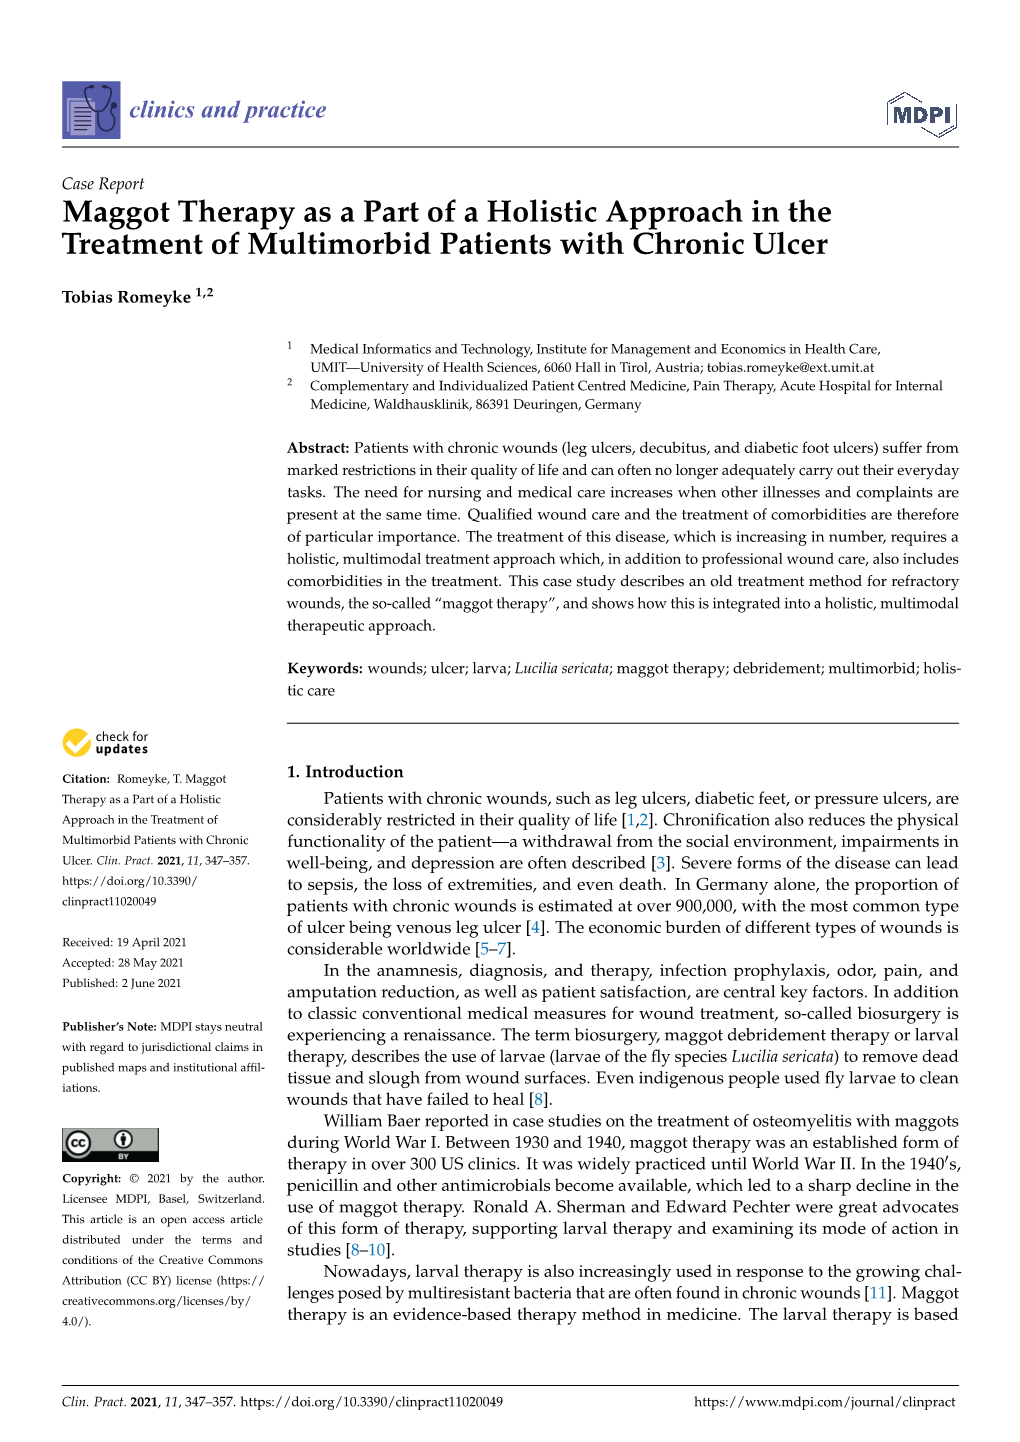 Maggot Therapy As a Part of a Holistic Approach in the Treatment of Multimorbid Patients with Chronic Ulcer